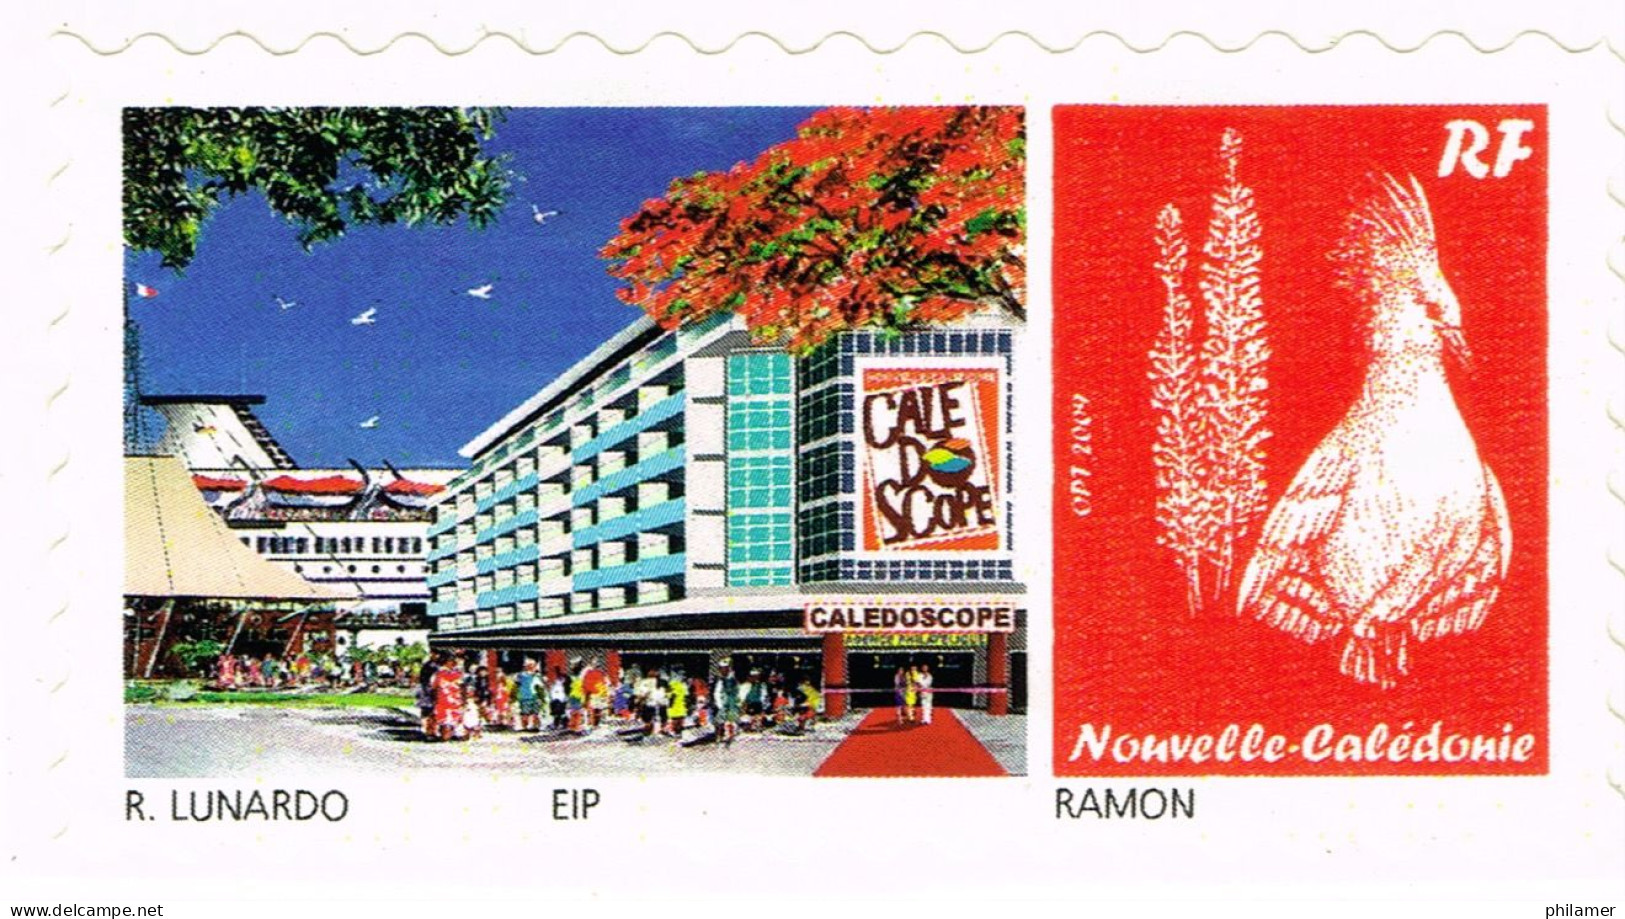 NOUVELLE CALEDONIE NEW CALEDONIA Timbre A Moi Personnalis Public YT 1187 TPNC21 Caledoscope 2012 Ramon Neuf B - Nuevos